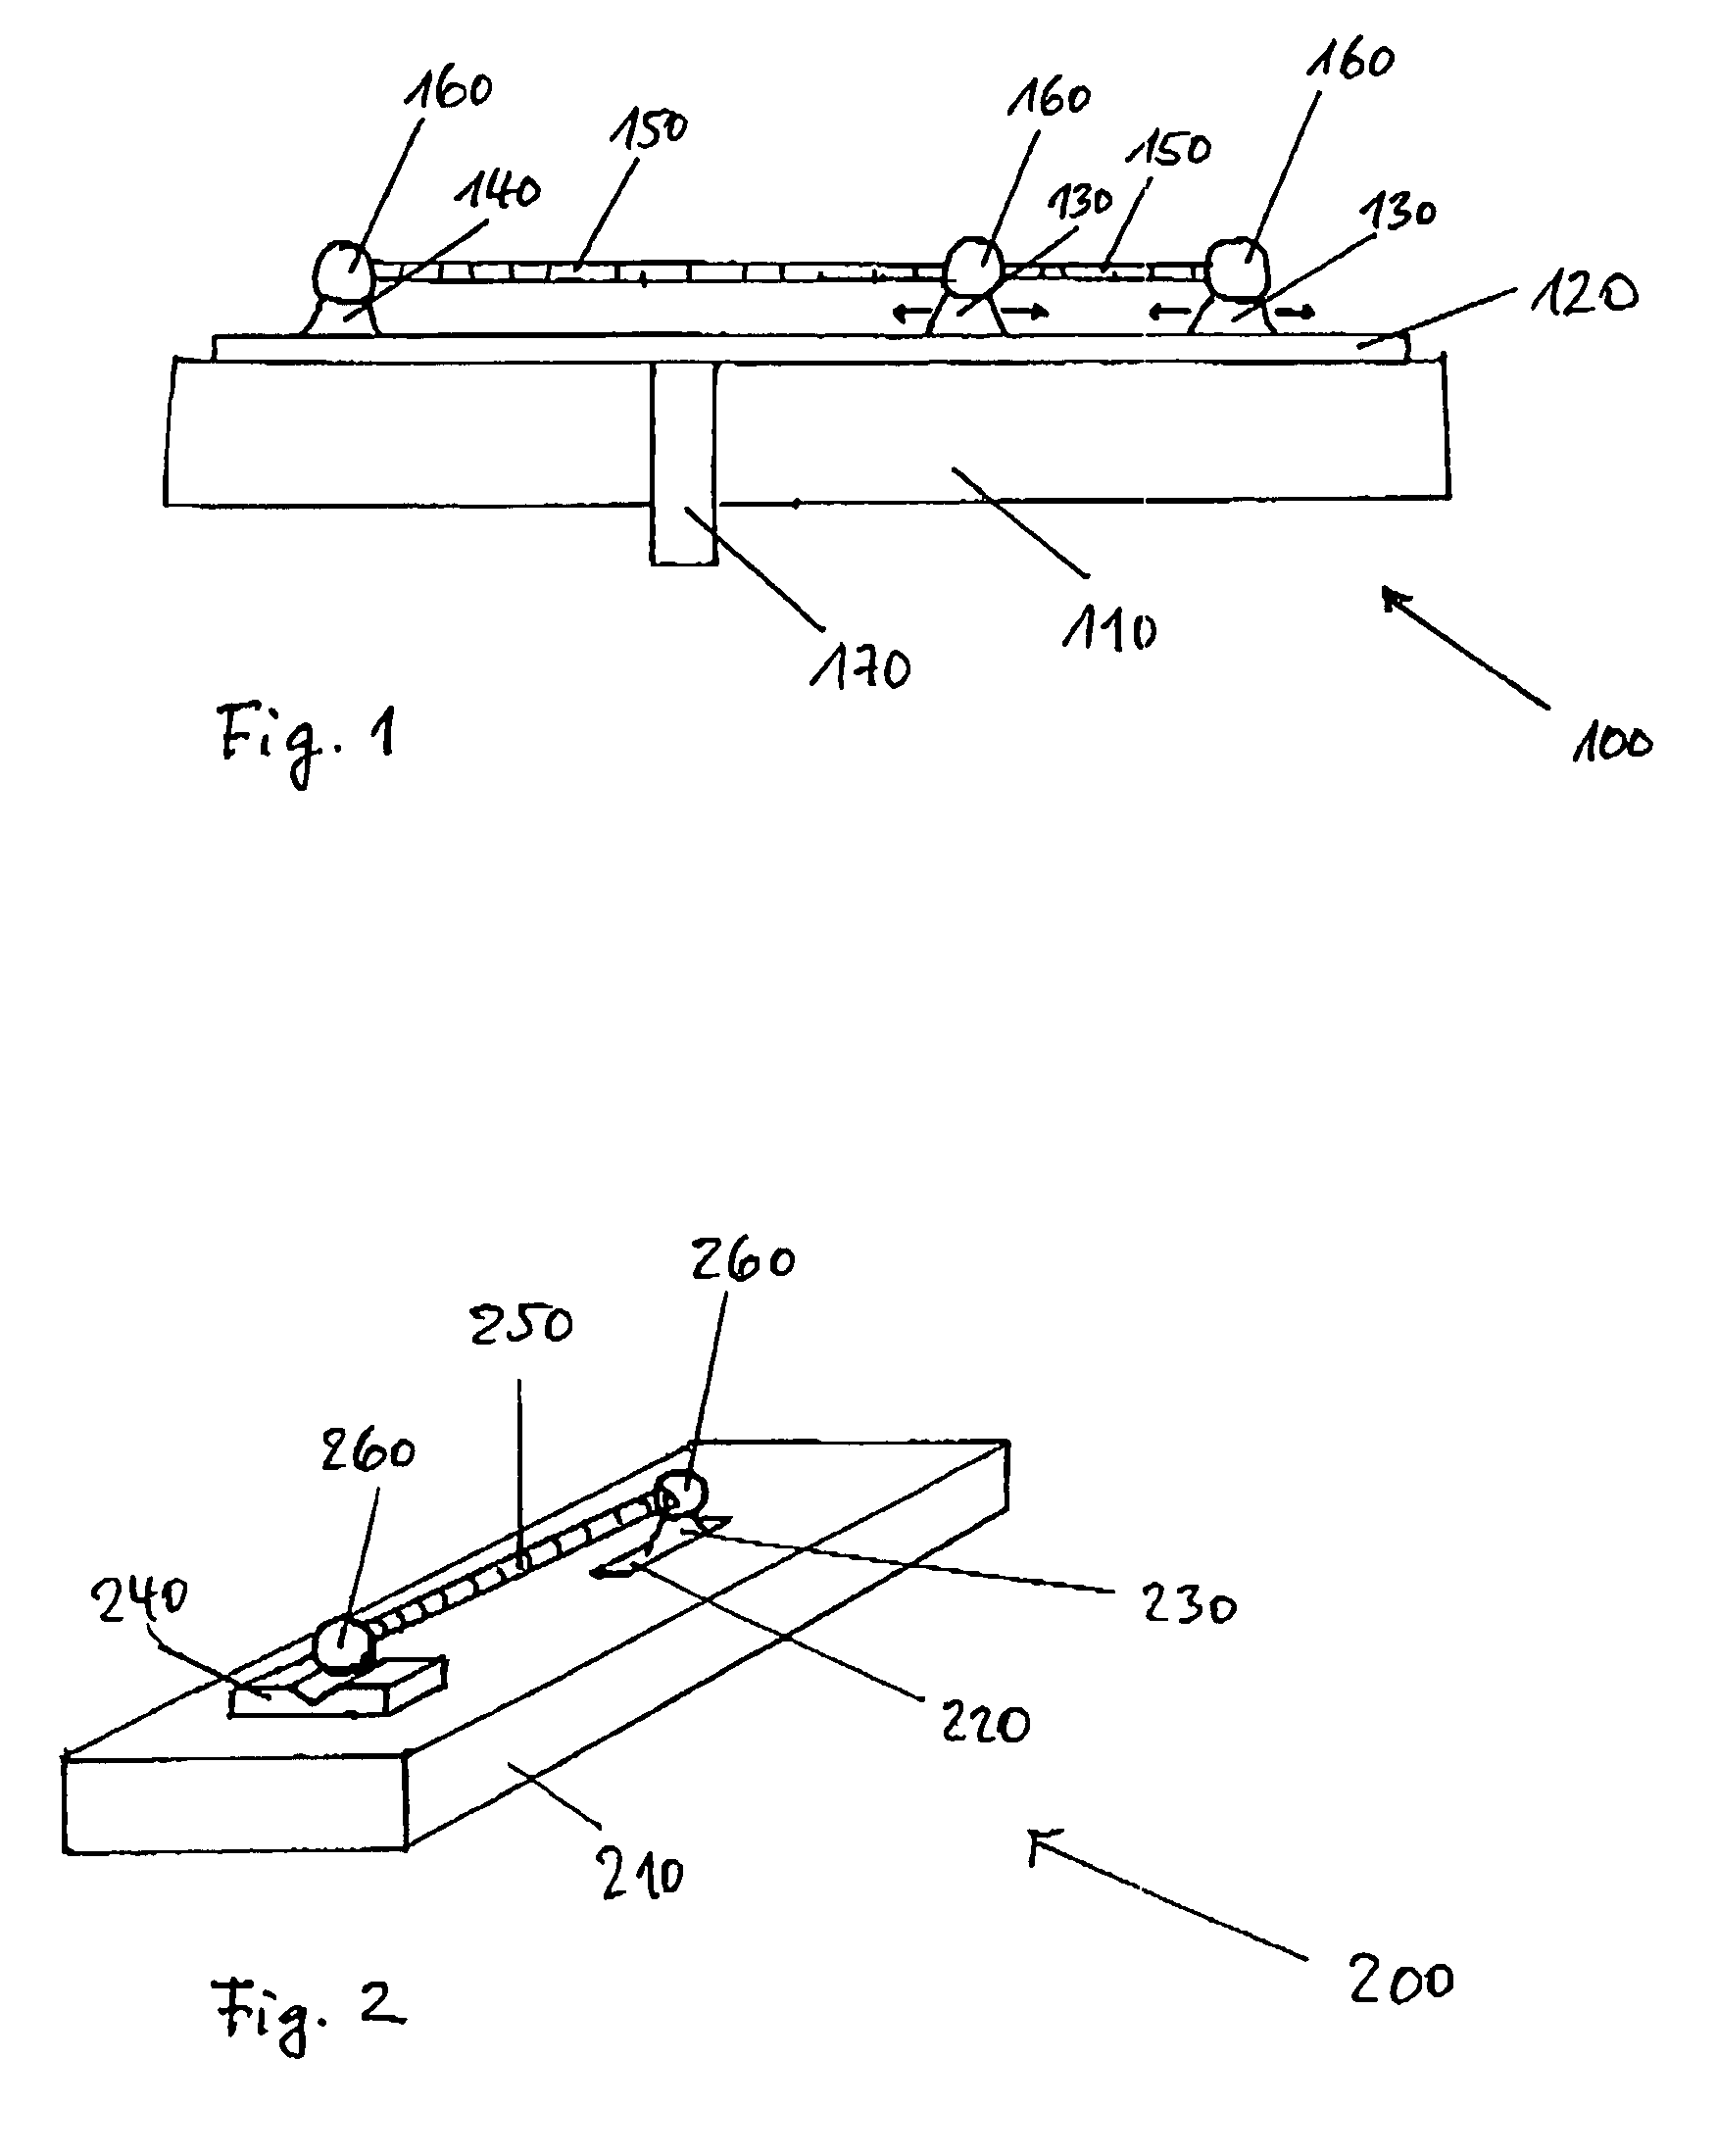 Variable test object and holder for variable test objects